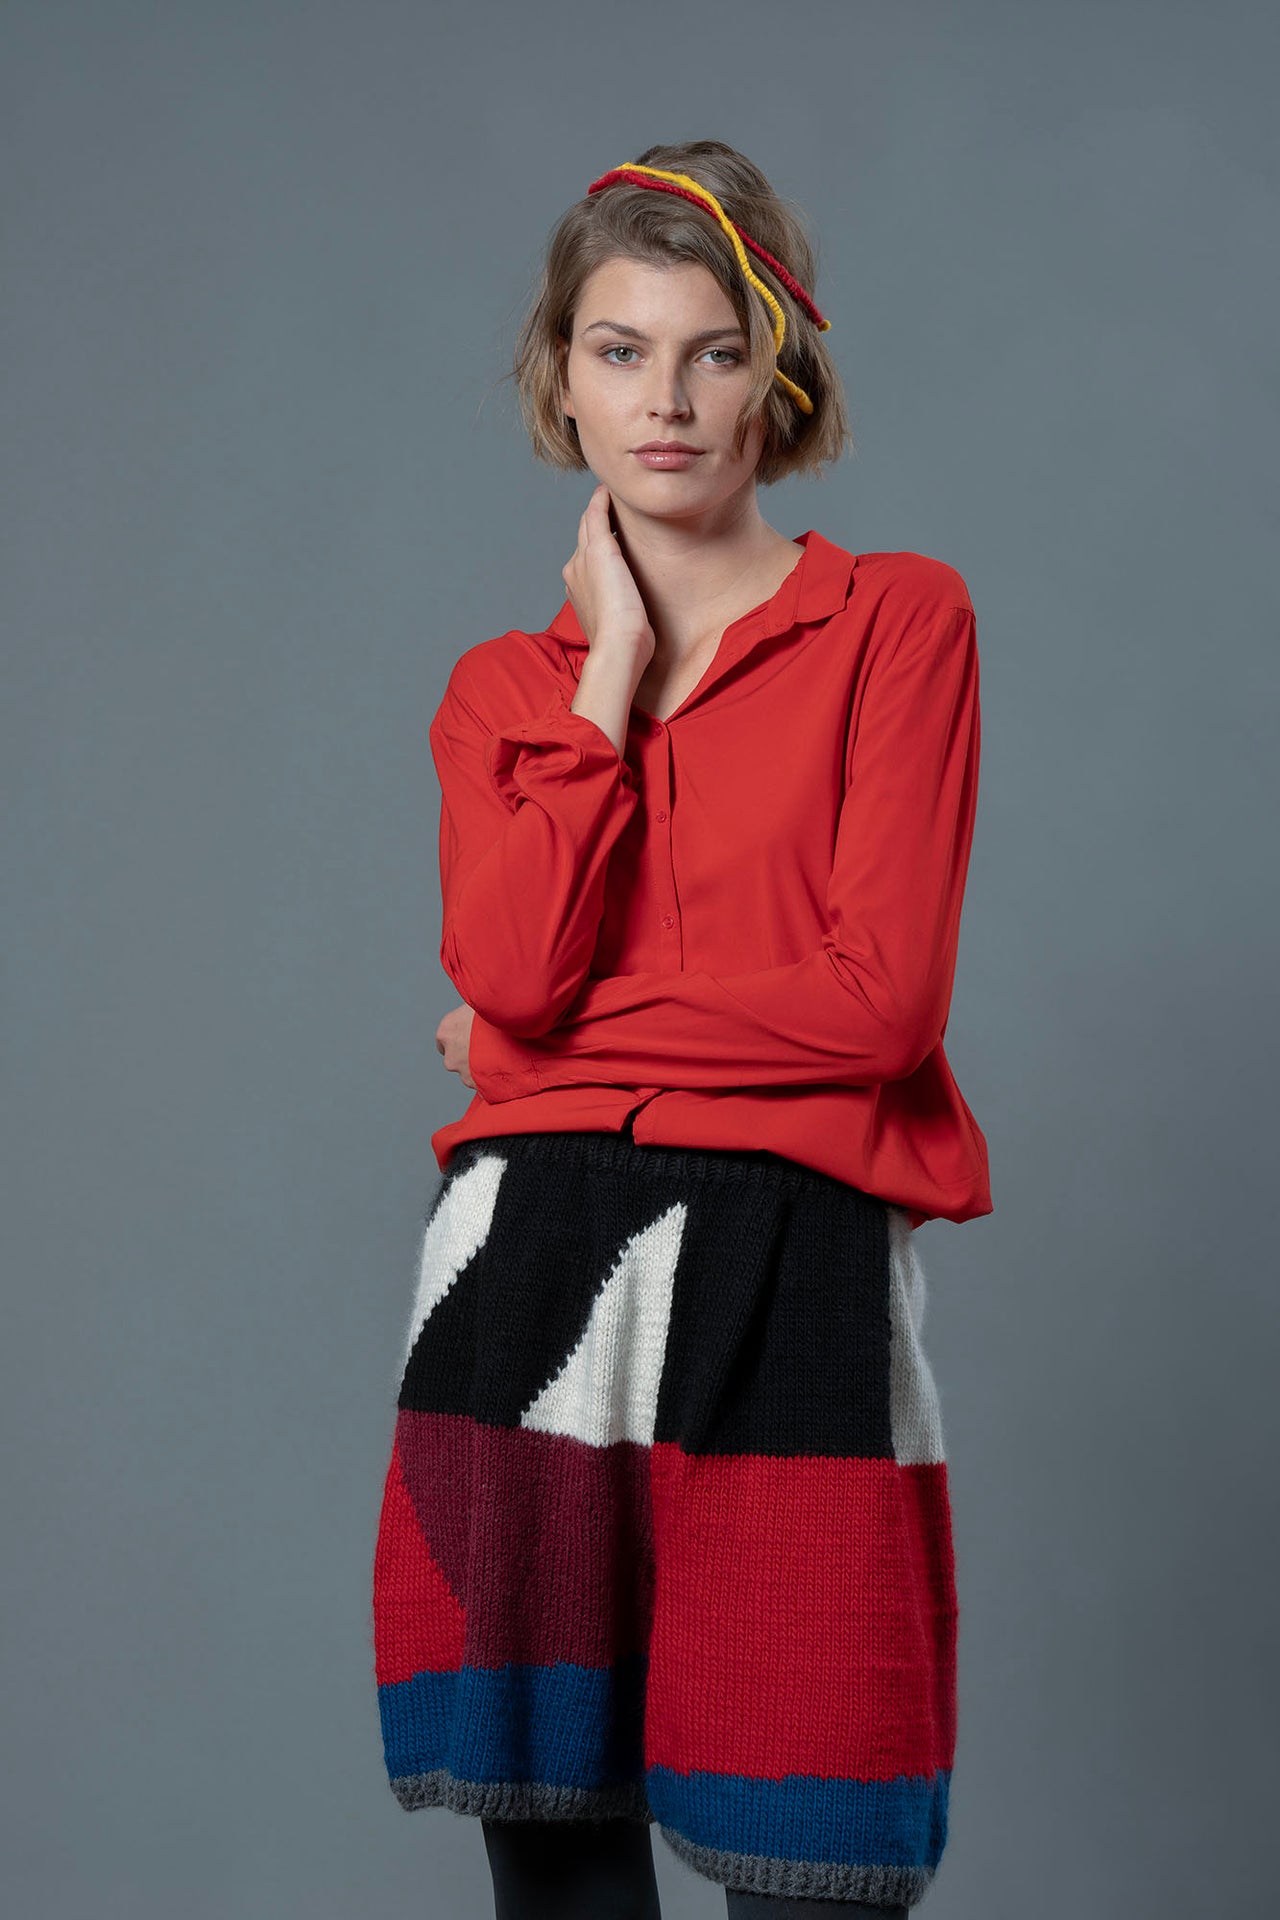 woman wearing red button up shirt and wool bermuda shorts with black, white, bordeau, red and blue colour block patterns. 